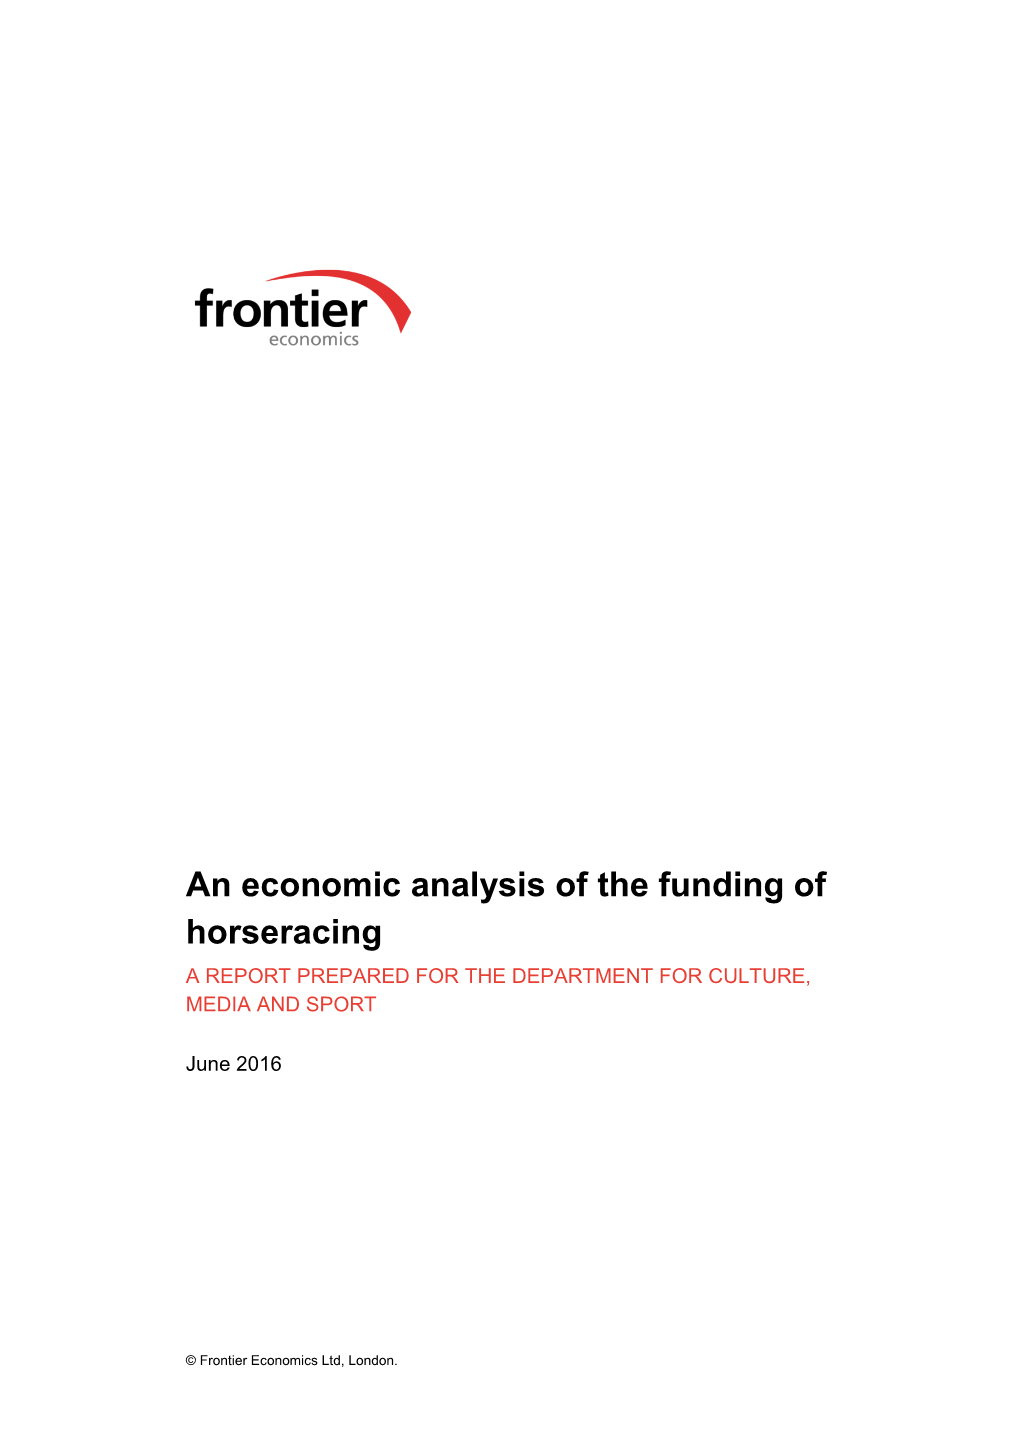 An Economic Analysis of the Funding of Horseracing a REPORT PREPARED for the DEPARTMENT for CULTURE, MEDIA and SPORT